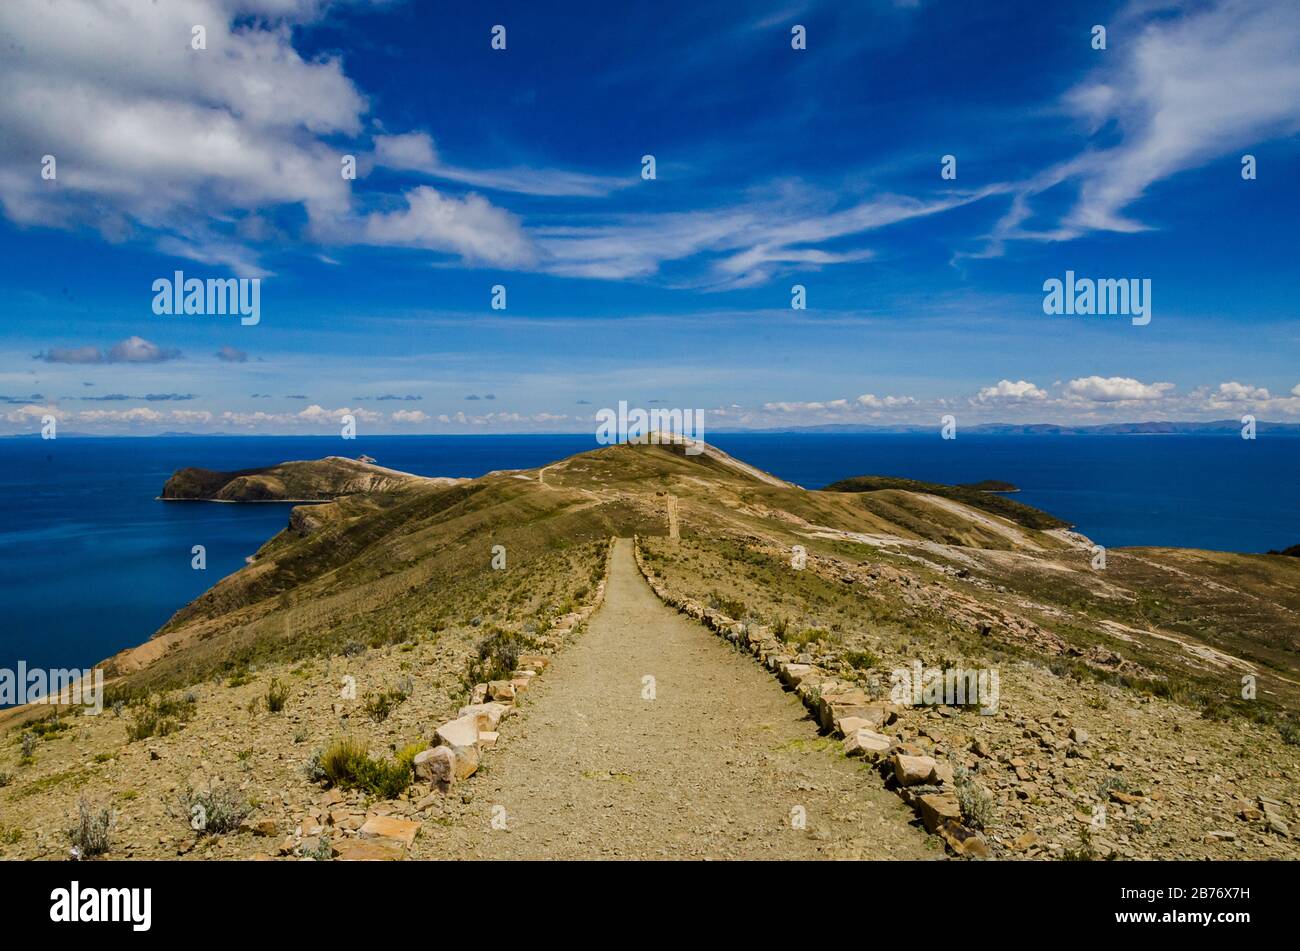 Landscape on Isla del Sol with a blue sky Titikaka Lake and a road Stock Photo